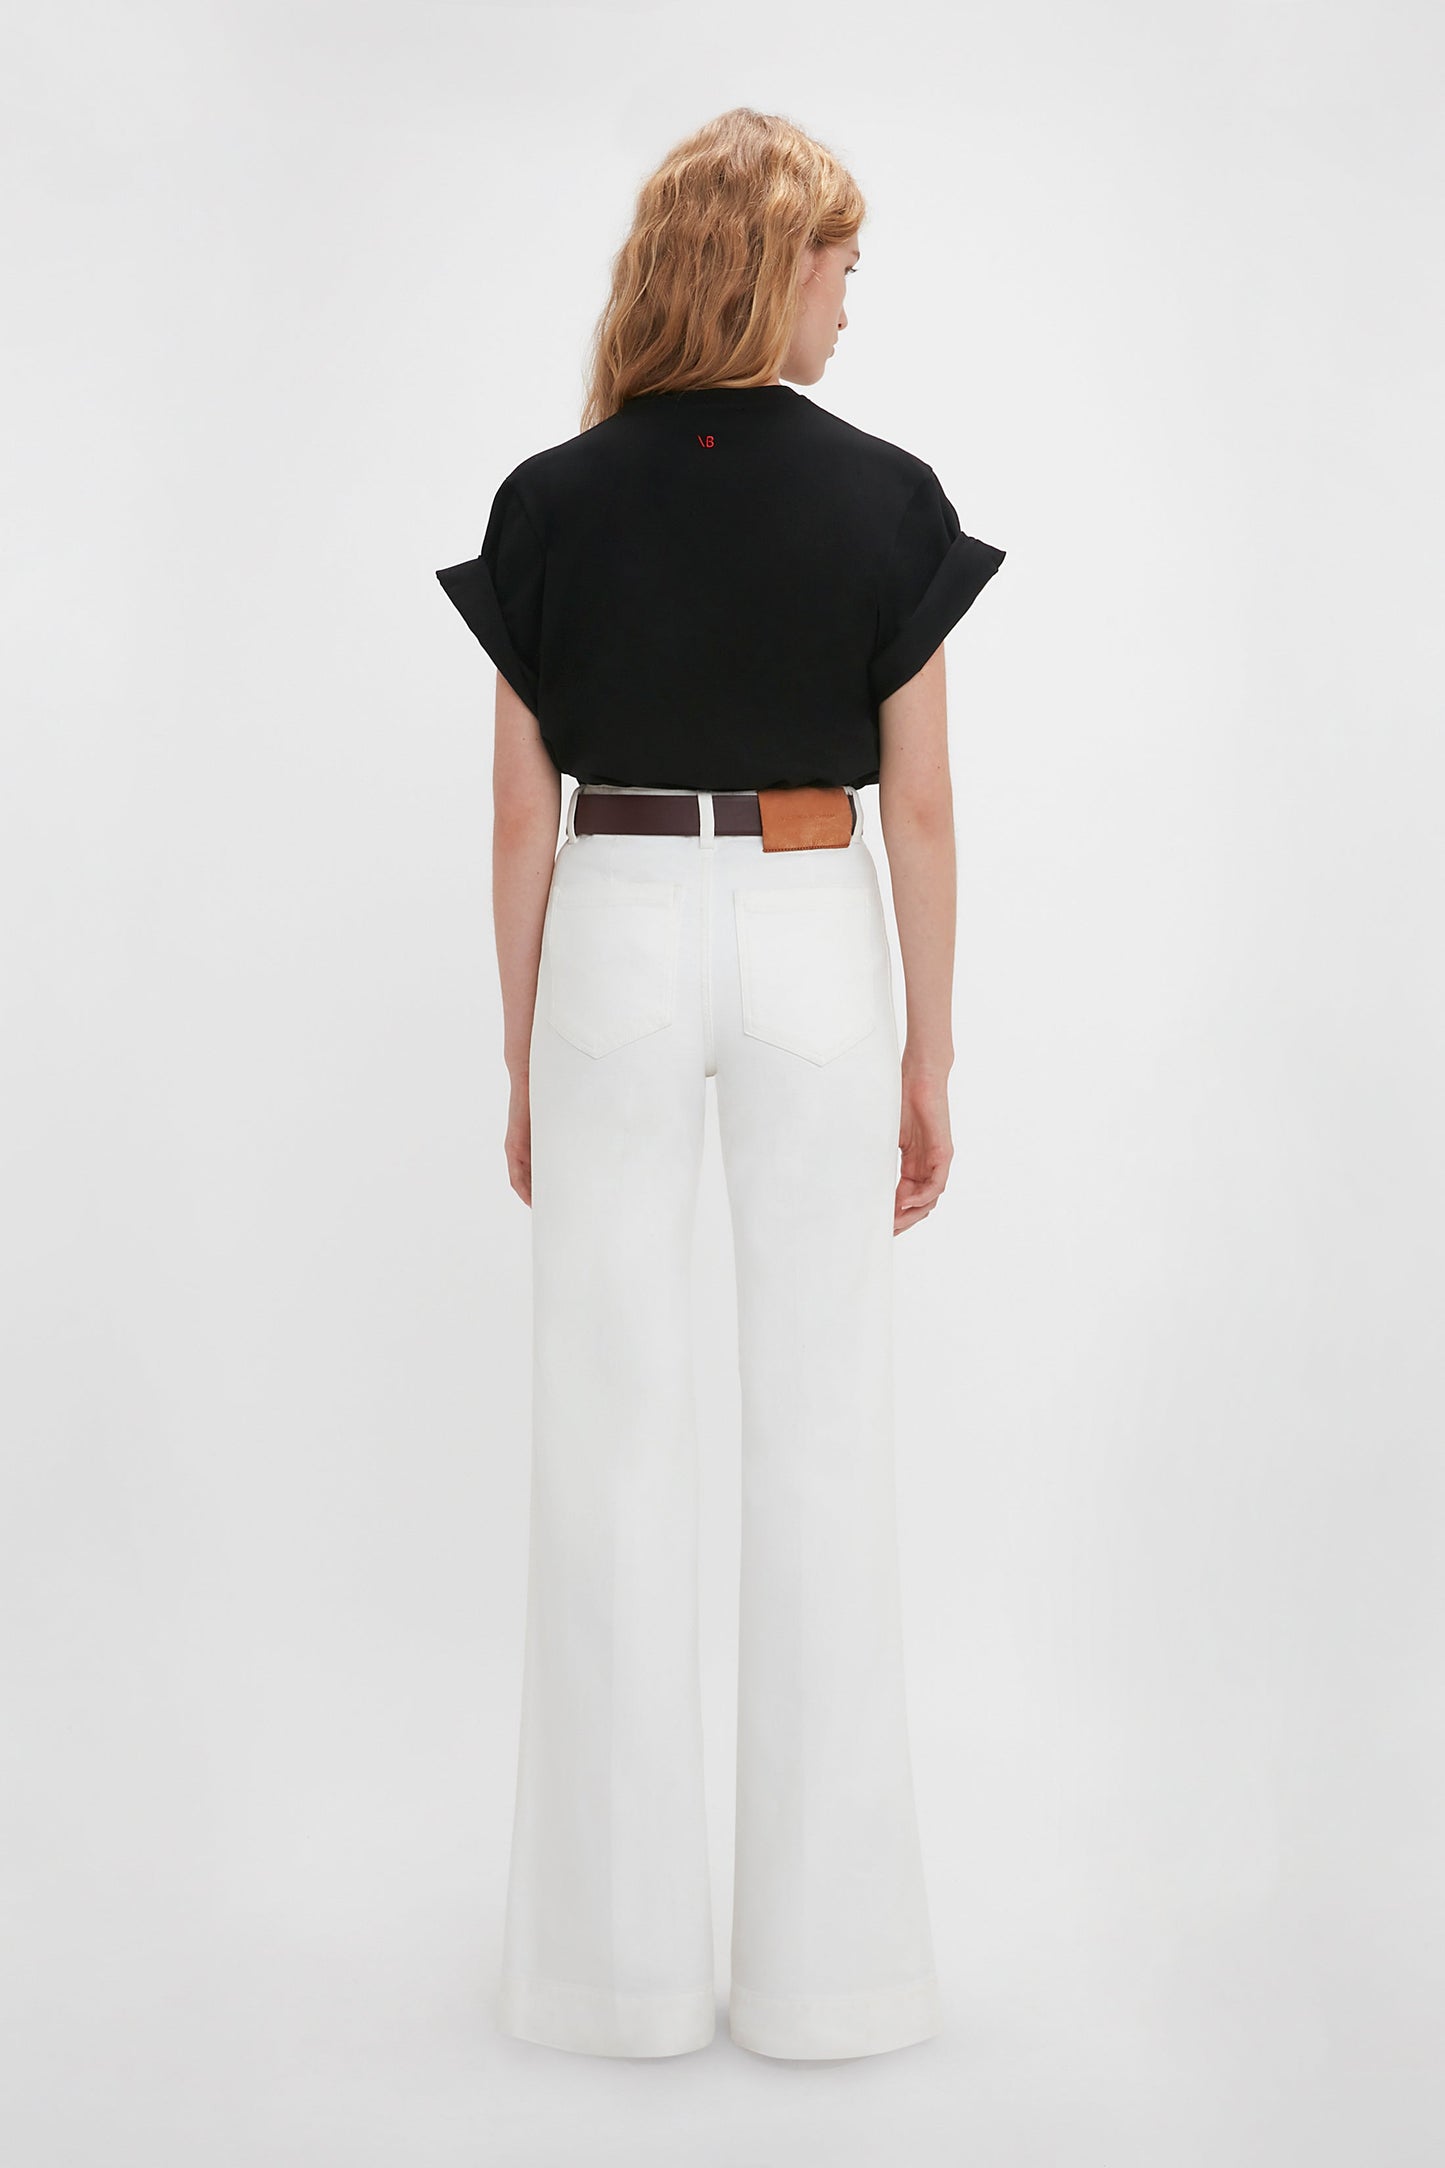 Woman seen from behind wearing a Victoria Beckham 'Do As I Say, Not As I Do' Slogan T-Shirt In Black and white wide-leg trousers with a brown belt against a plain background.